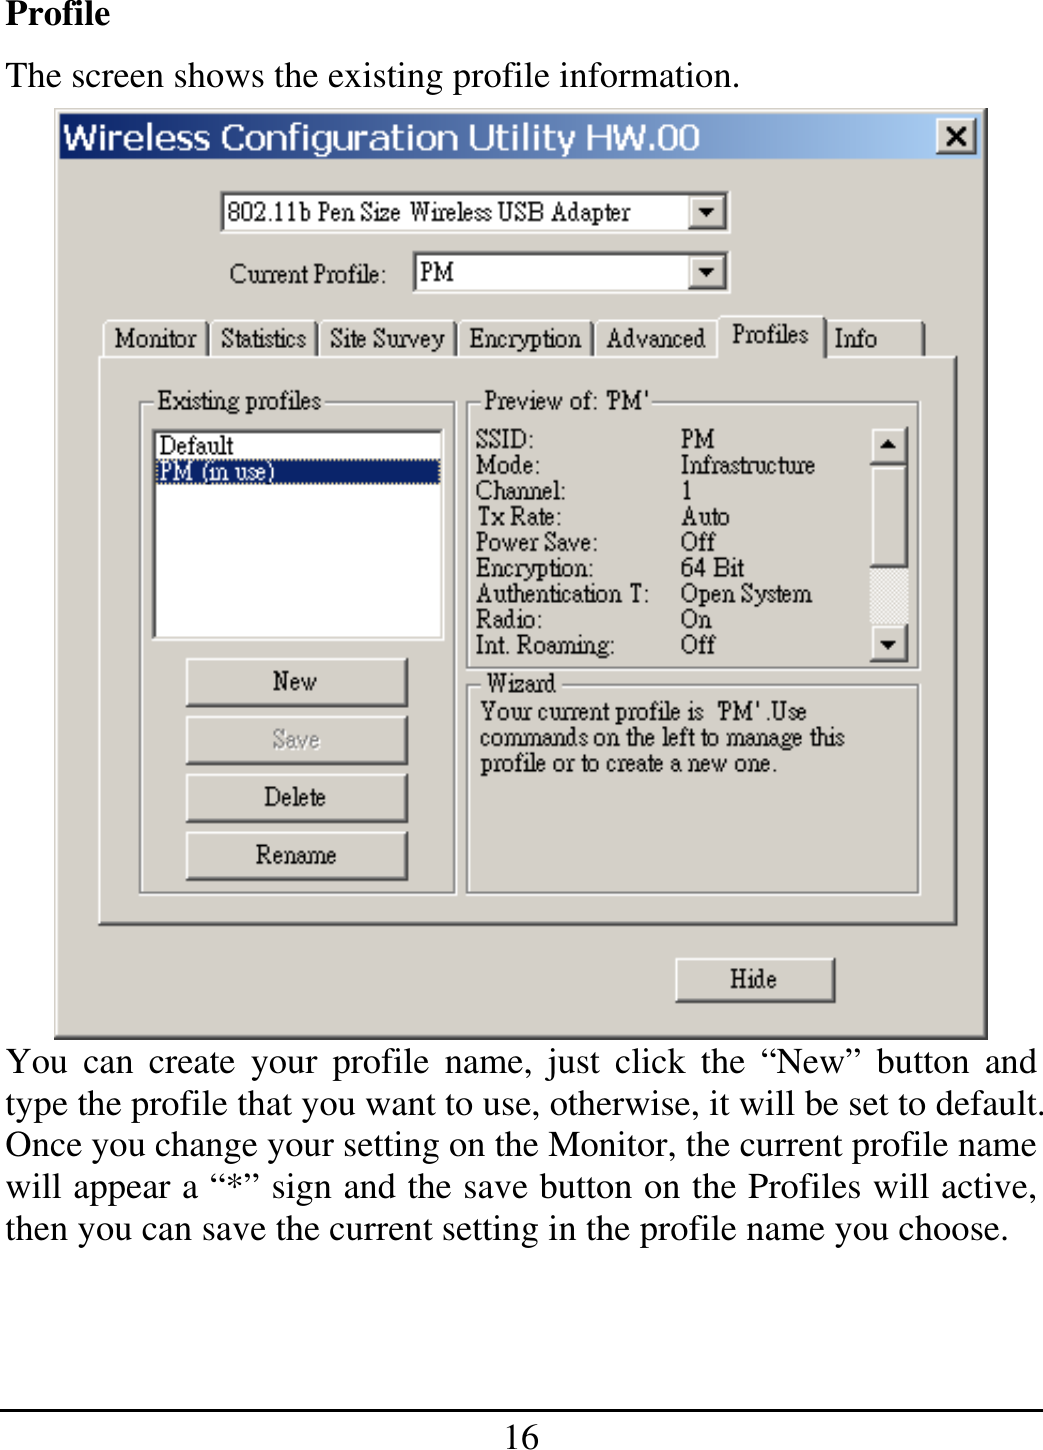 16 Profile The screen shows the existing profile information.  You can create your profile name, just click the “New” button and type the profile that you want to use, otherwise, it will be set to default. Once you change your setting on the Monitor, the current profile name will appear a “*” sign and the save button on the Profiles will active, then you can save the current setting in the profile name you choose.   